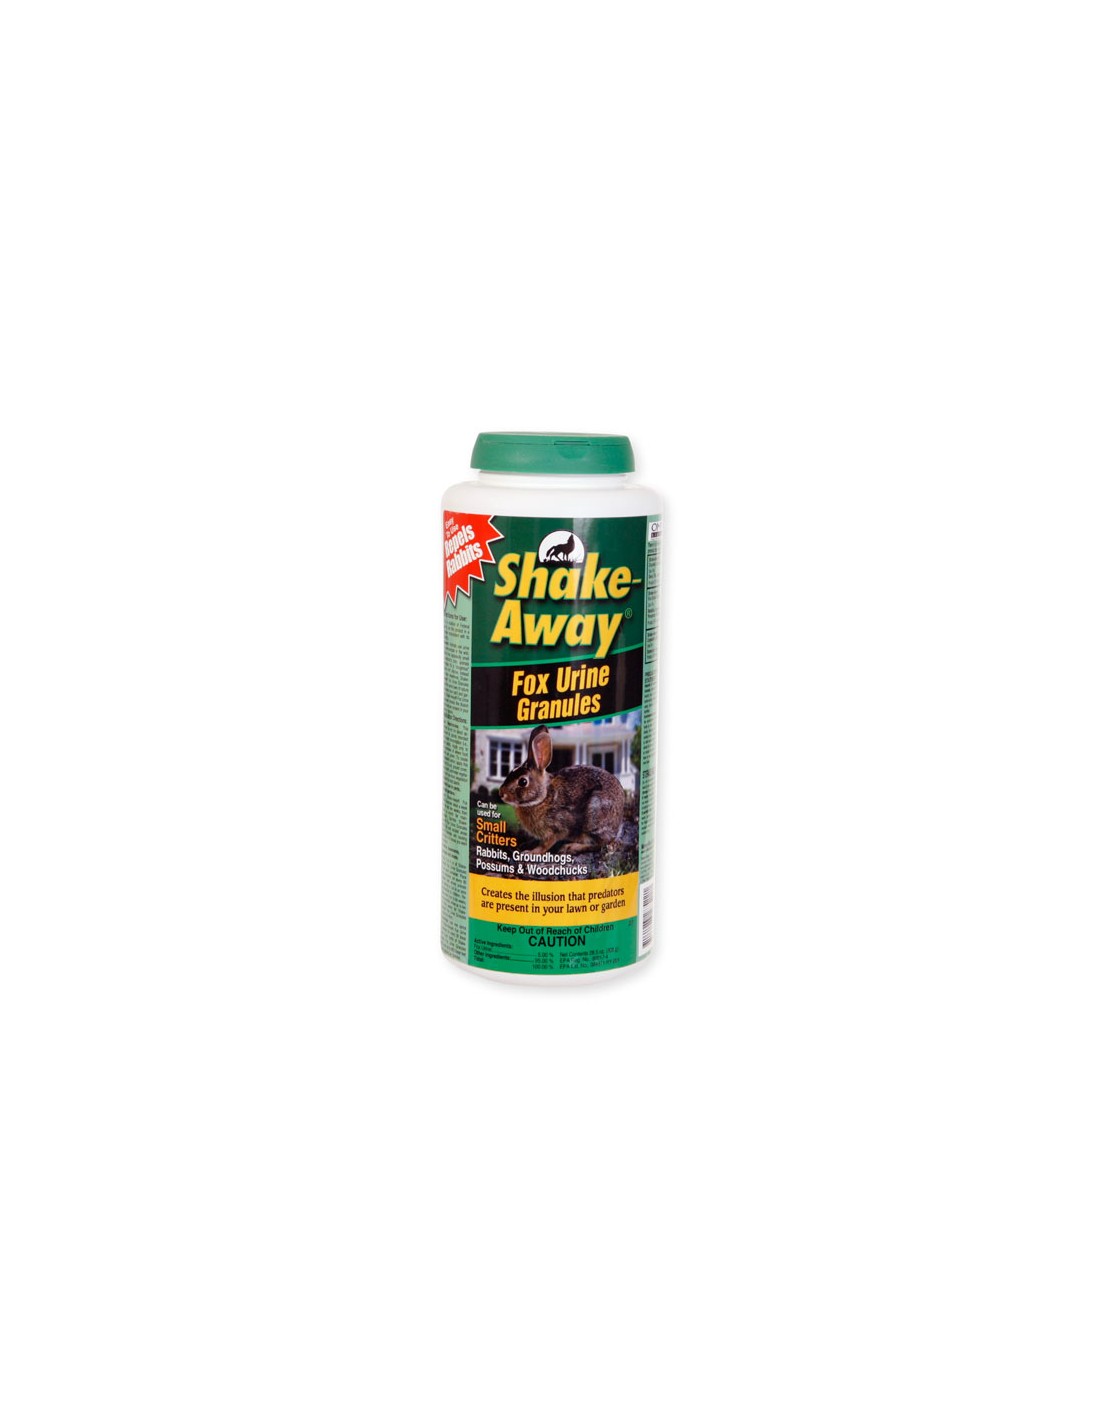 Want to apply a repellent in my attic for squirrels. Do you recommend anything? Thanks!